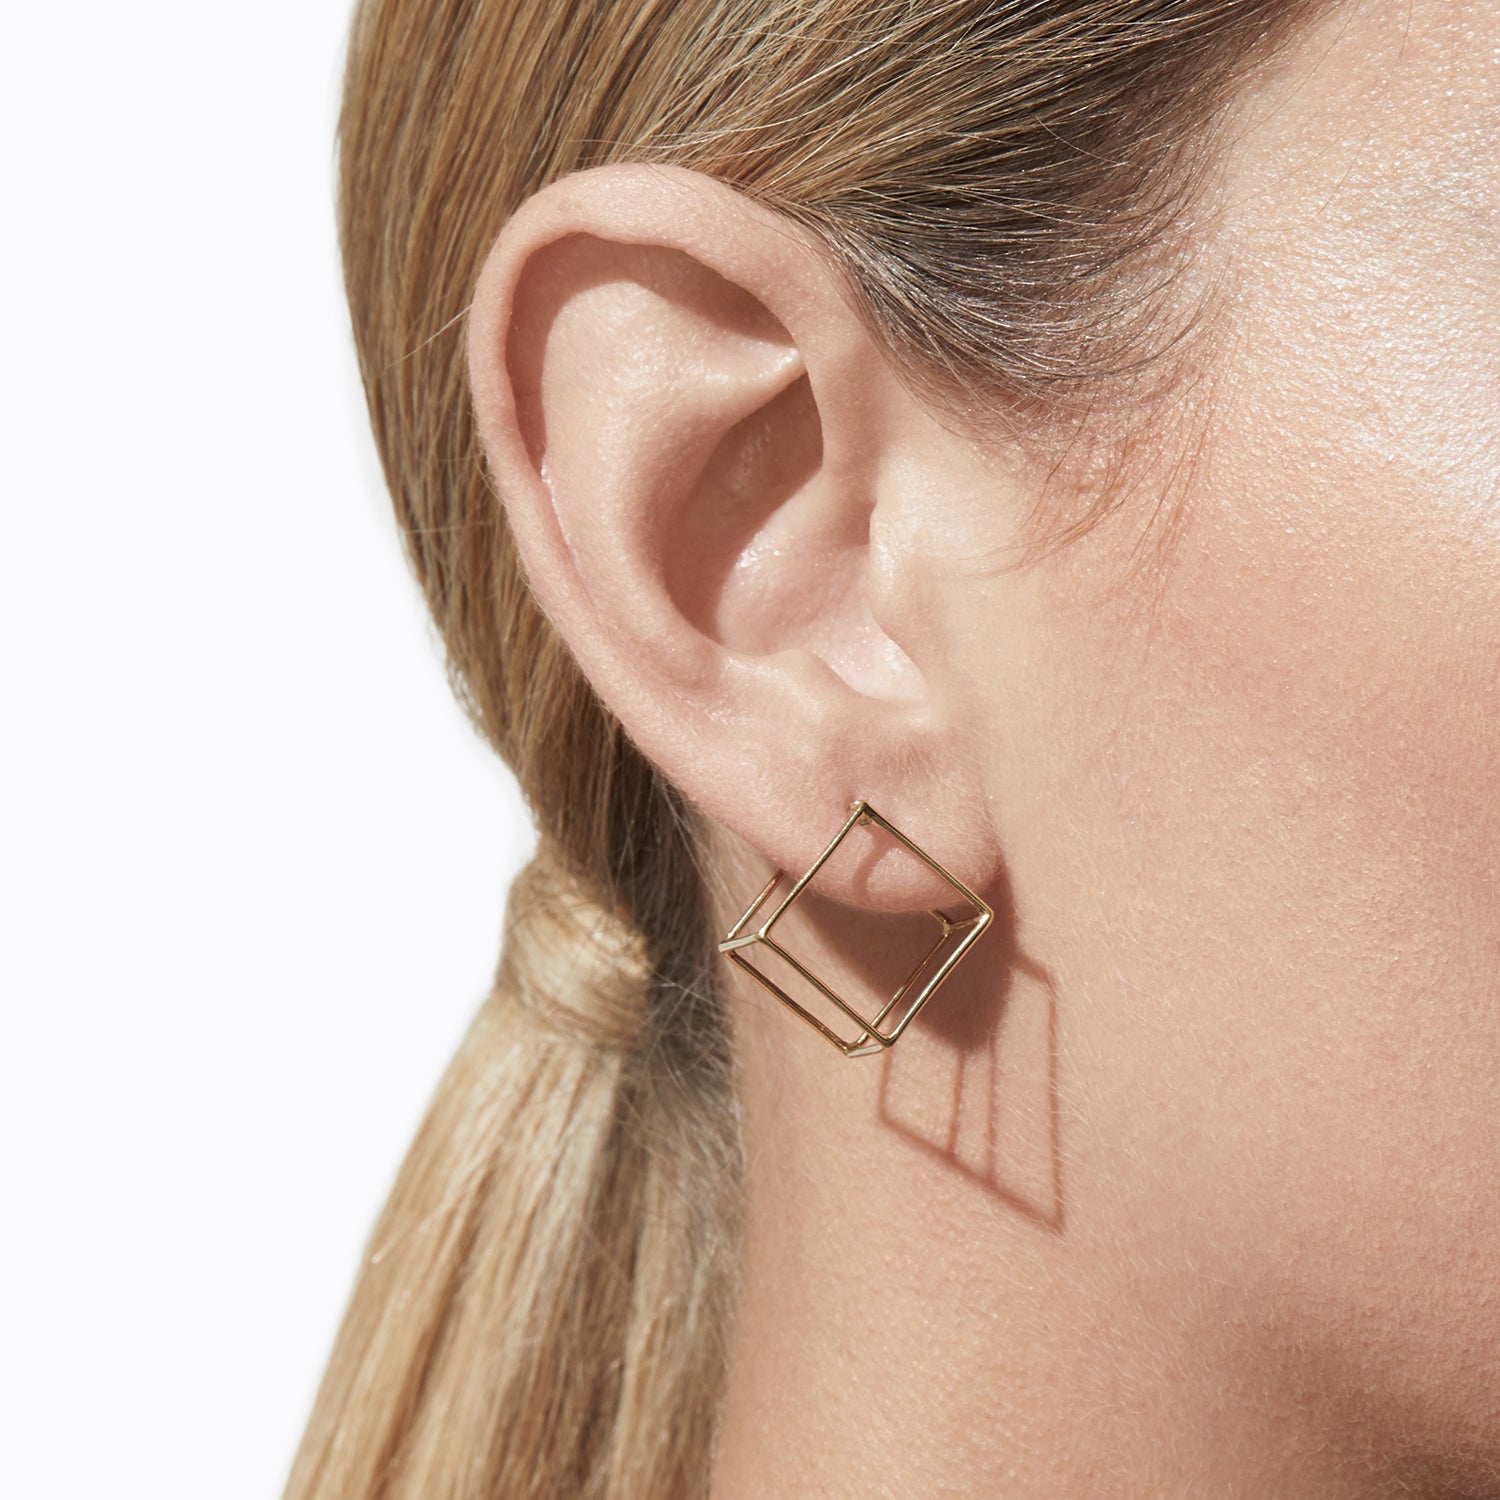 3D Square Earring 15 – barbedwire